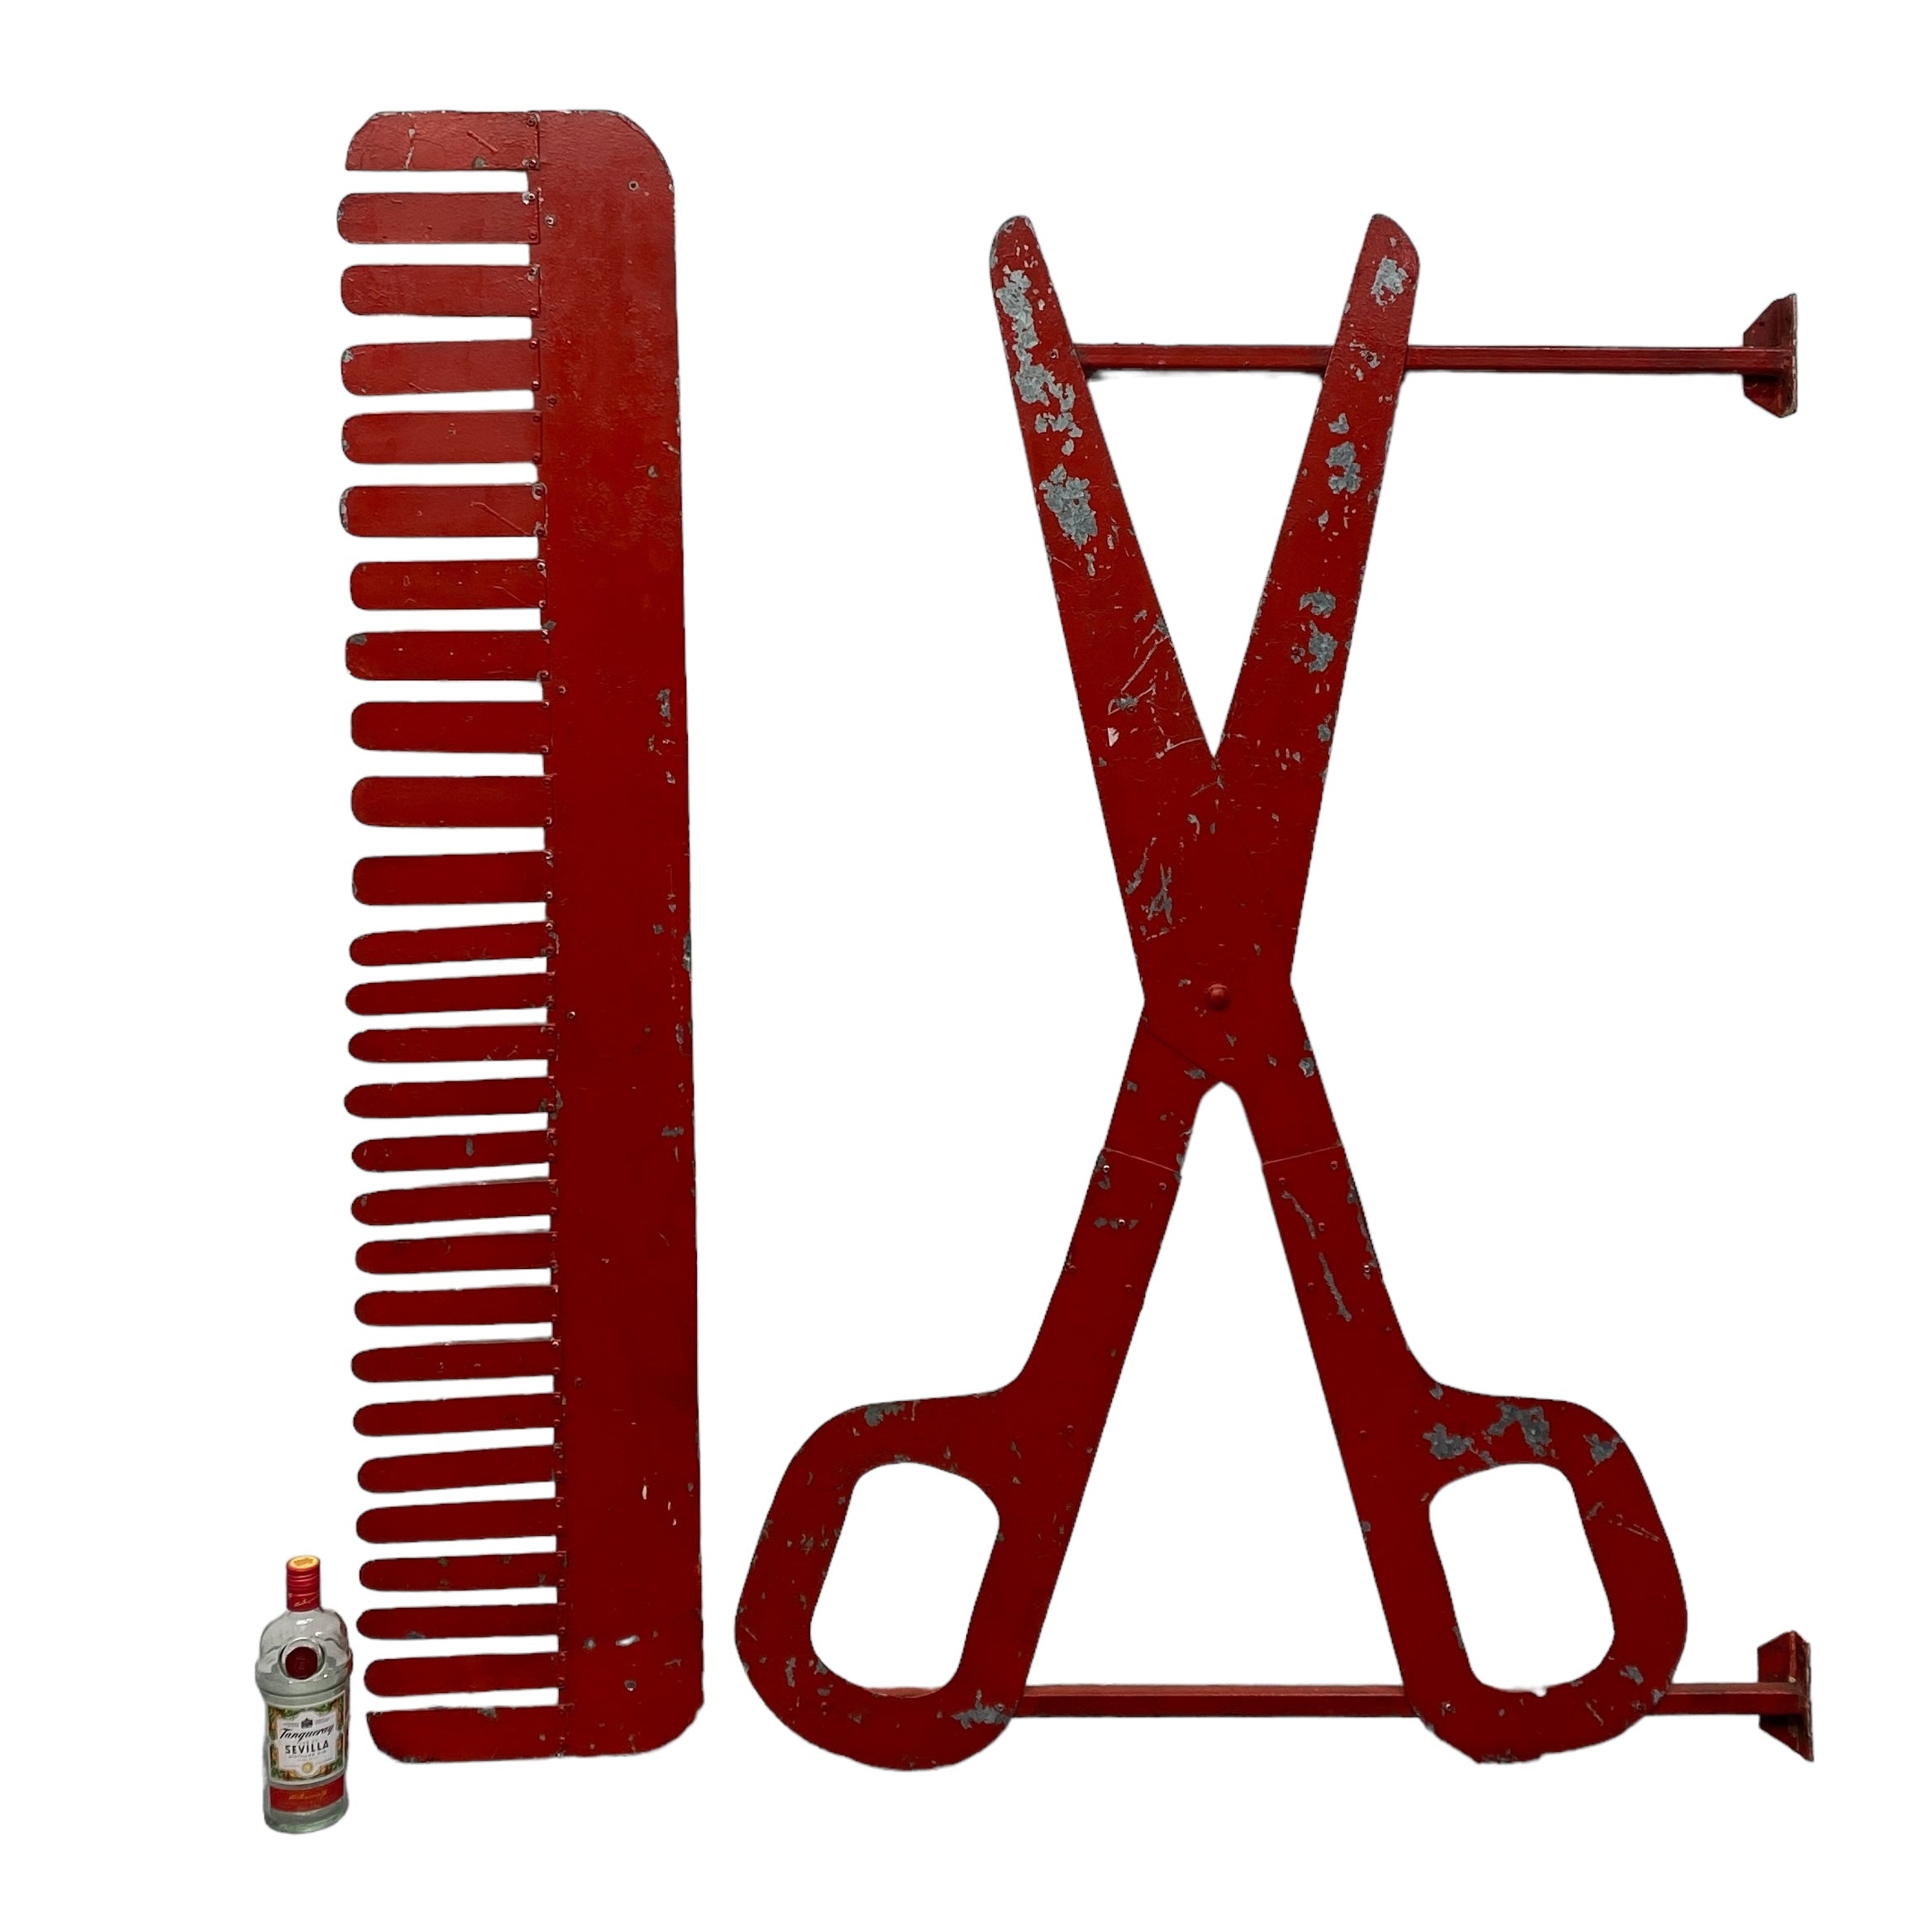 Red Vintage Signage Barbers Hairdressers Scissors Comb